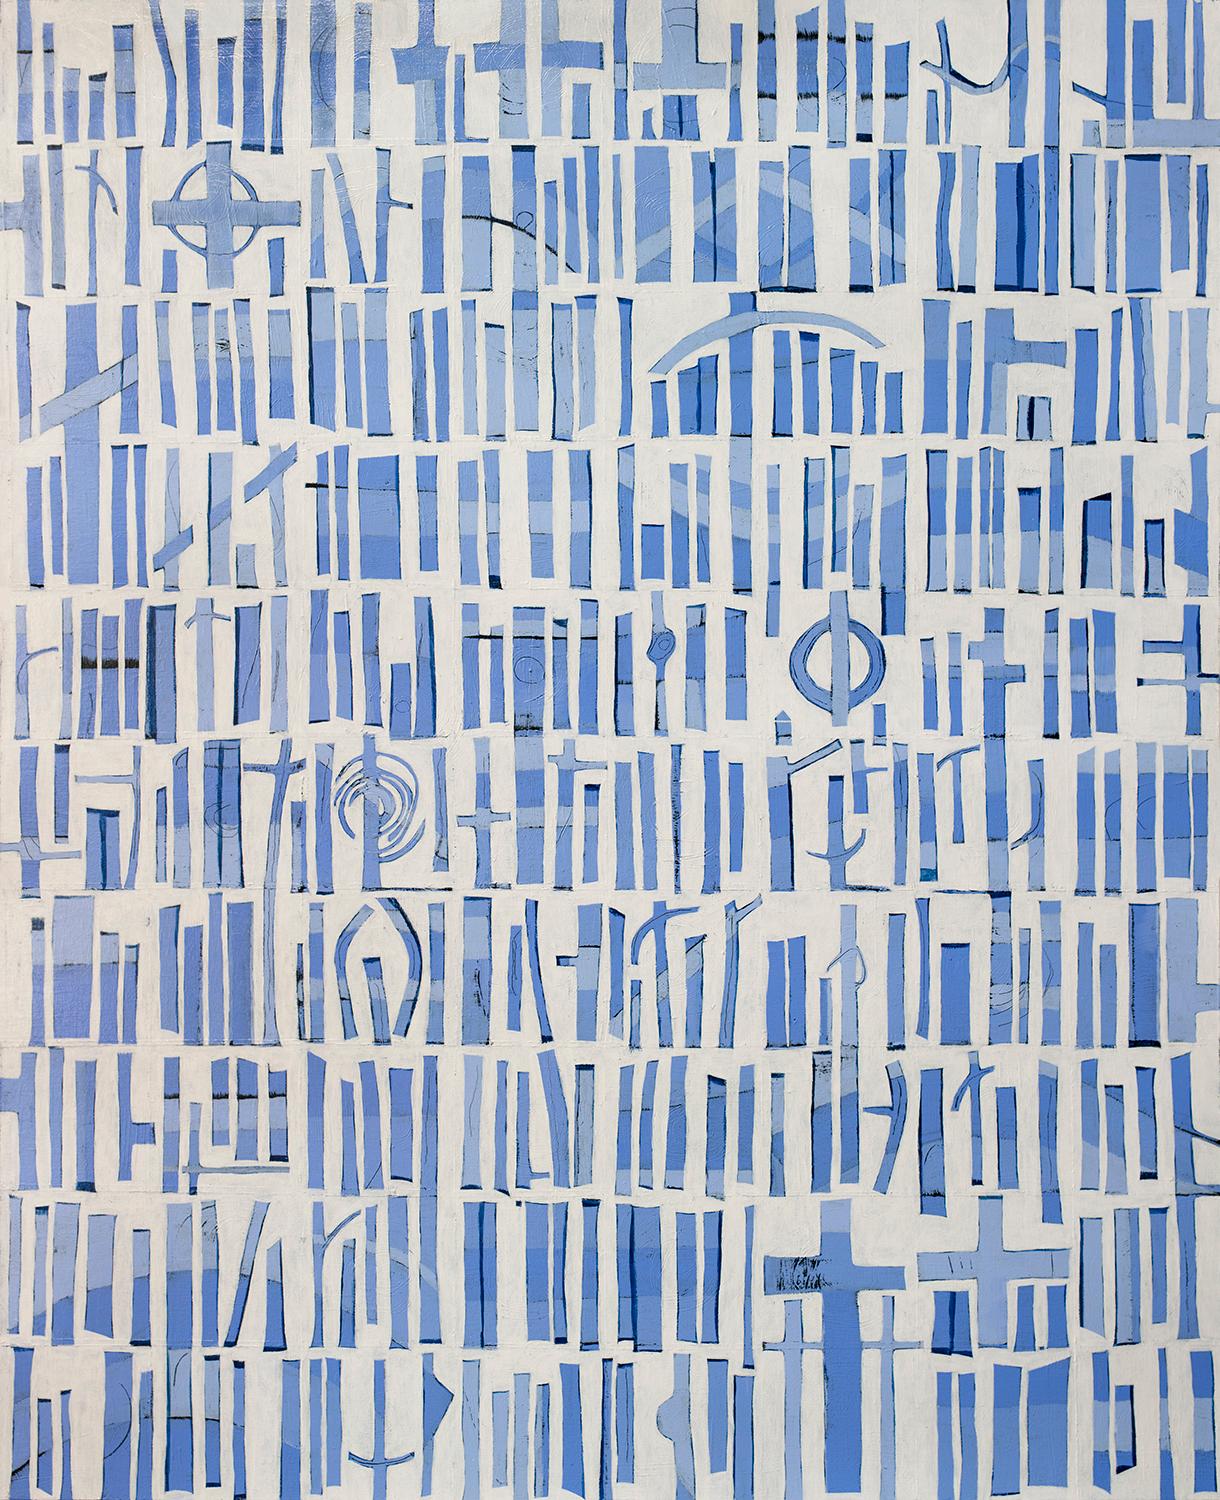 This large, abstract painting by Sofie Swann is made with acrylic paint on canvas. Sofie Swann marries geometric and organic shapes together, giving life and movement to what would otherwise look to be a pattern of blue shapes on a white background.